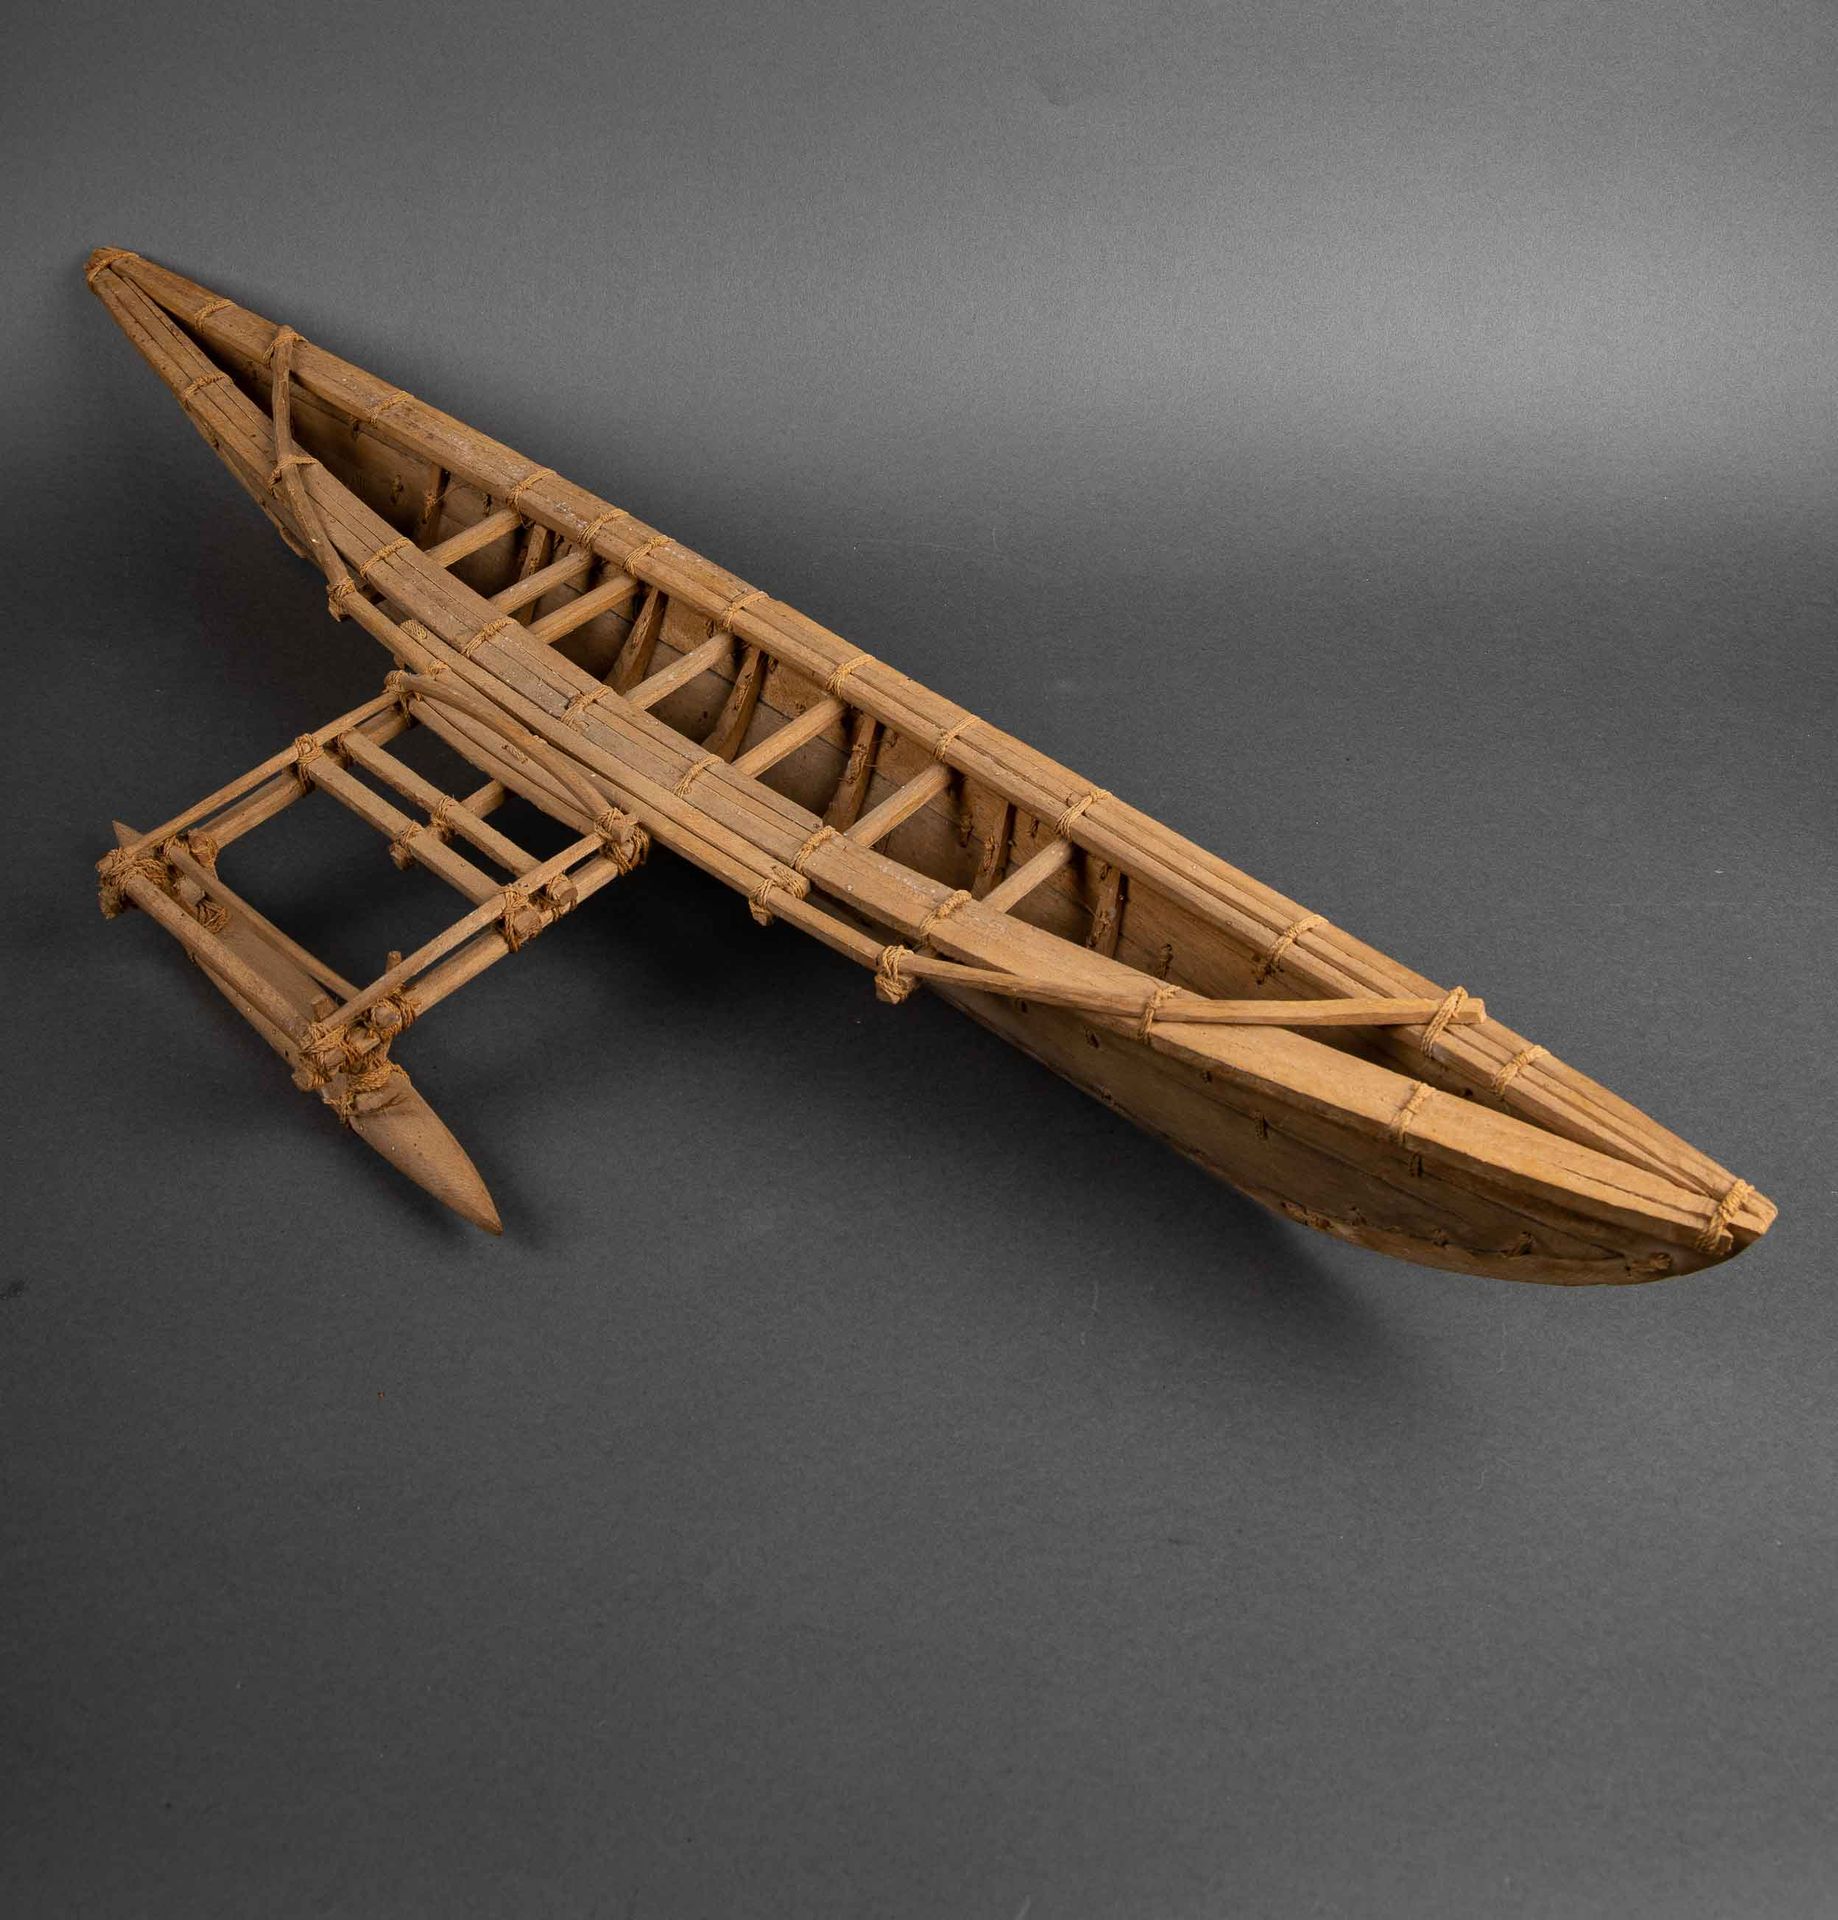 Null Model of an outrigger canoe made of wood, bark, cords and various materials&hellip;